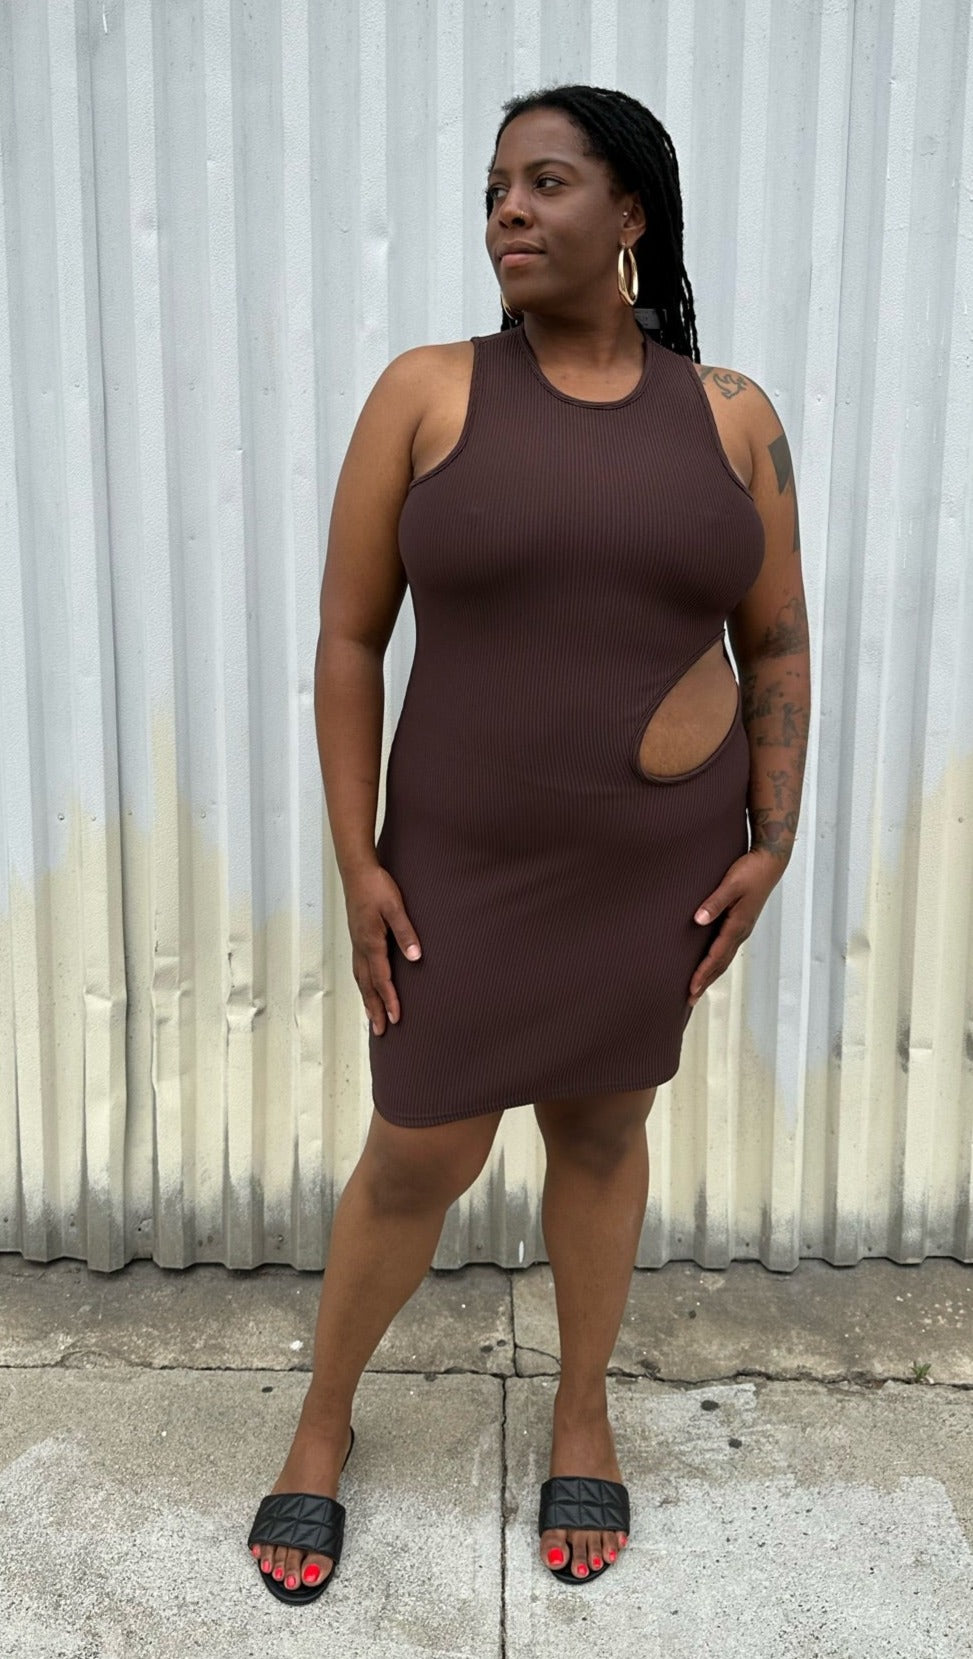 Full-body front view of a size 14 Pretty Little Thing dark brown ribbed cut-out mini bodycon dress styled with black slides on a size 14/16 model. The photo is taken outside in natural lighting.